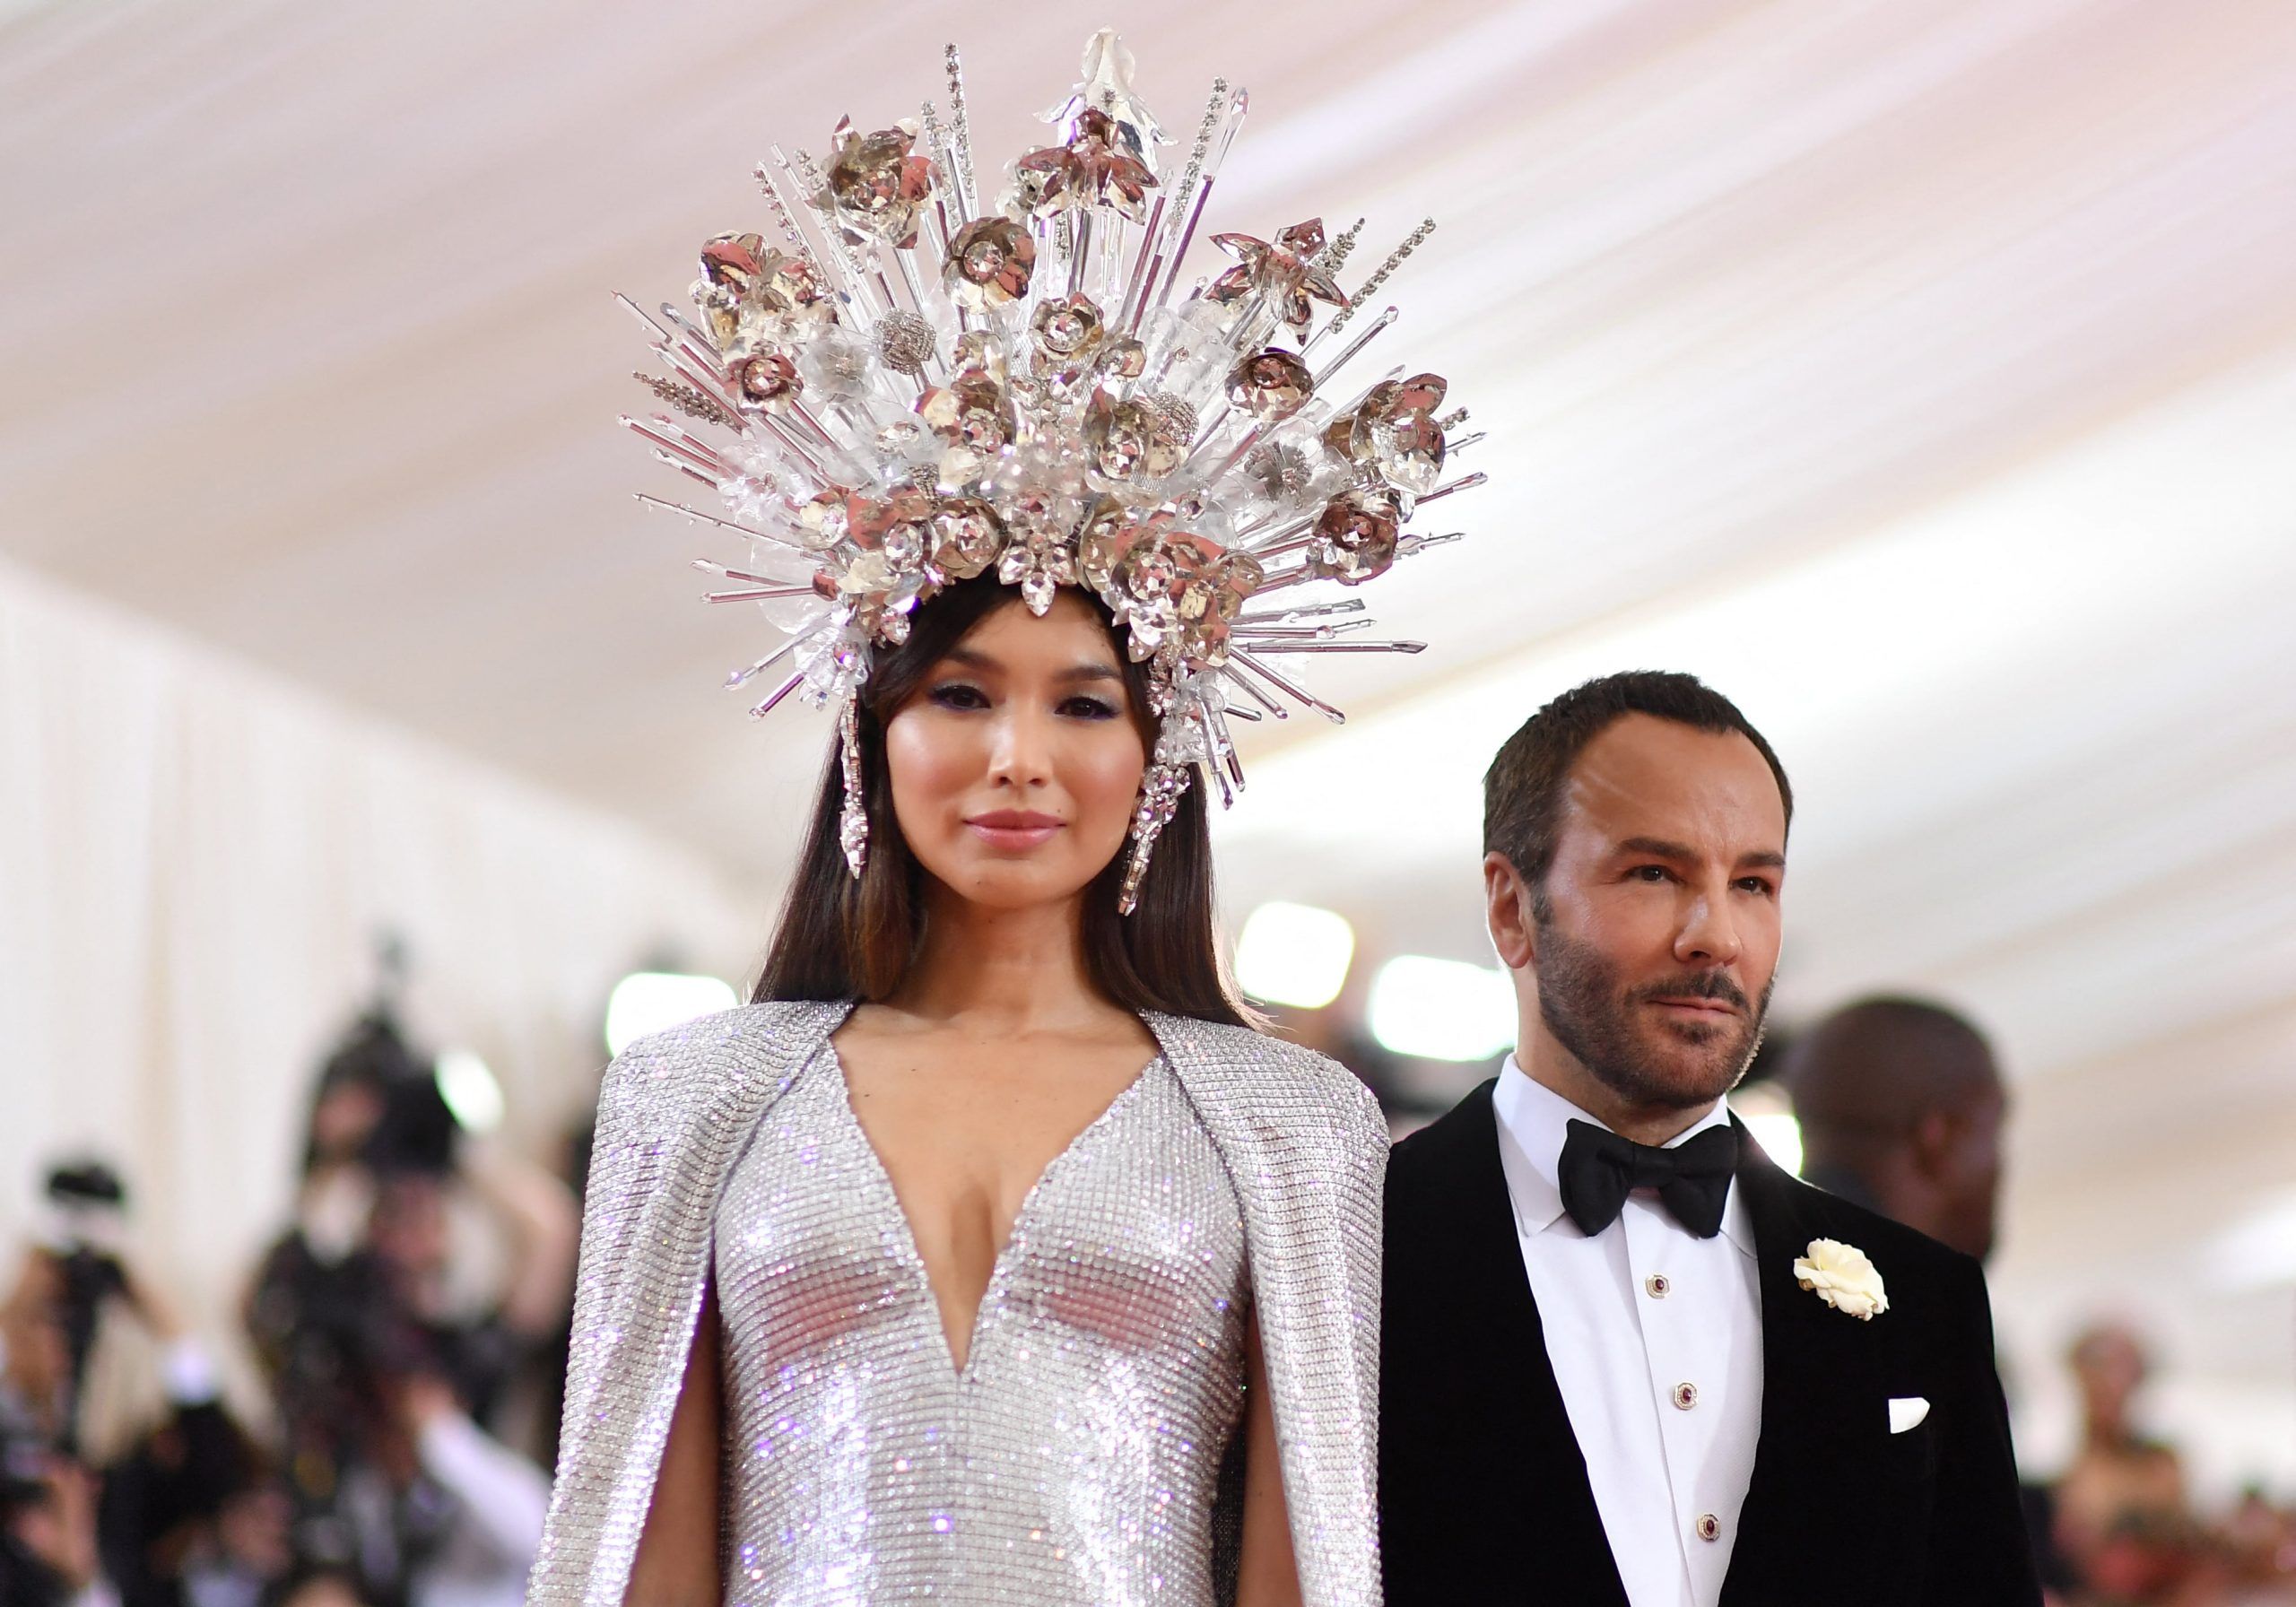 Met Gala 2022: Everything to Know About Hosts, Theme and More